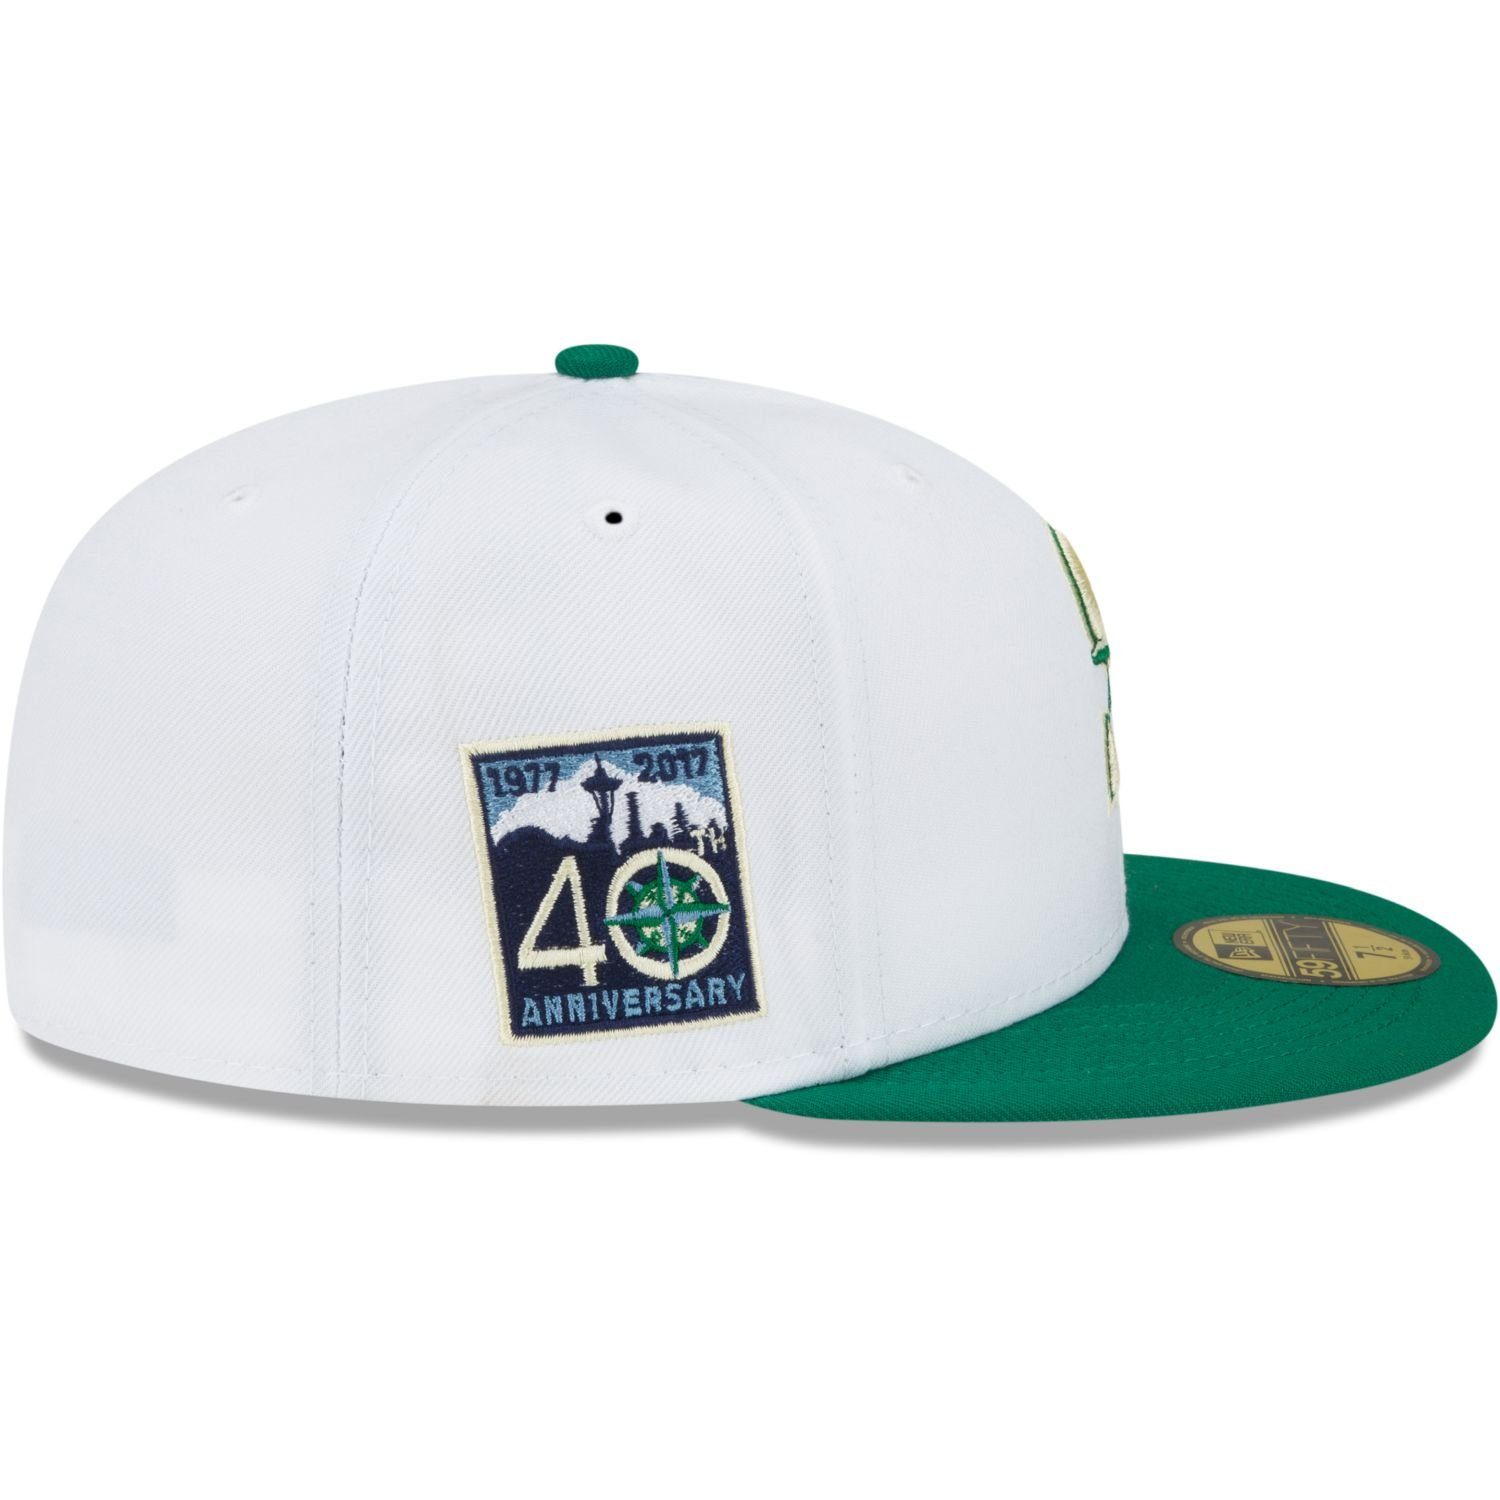 New Era Fitted Cap 59Fifty ANNIVERSARY Mariners Seattle